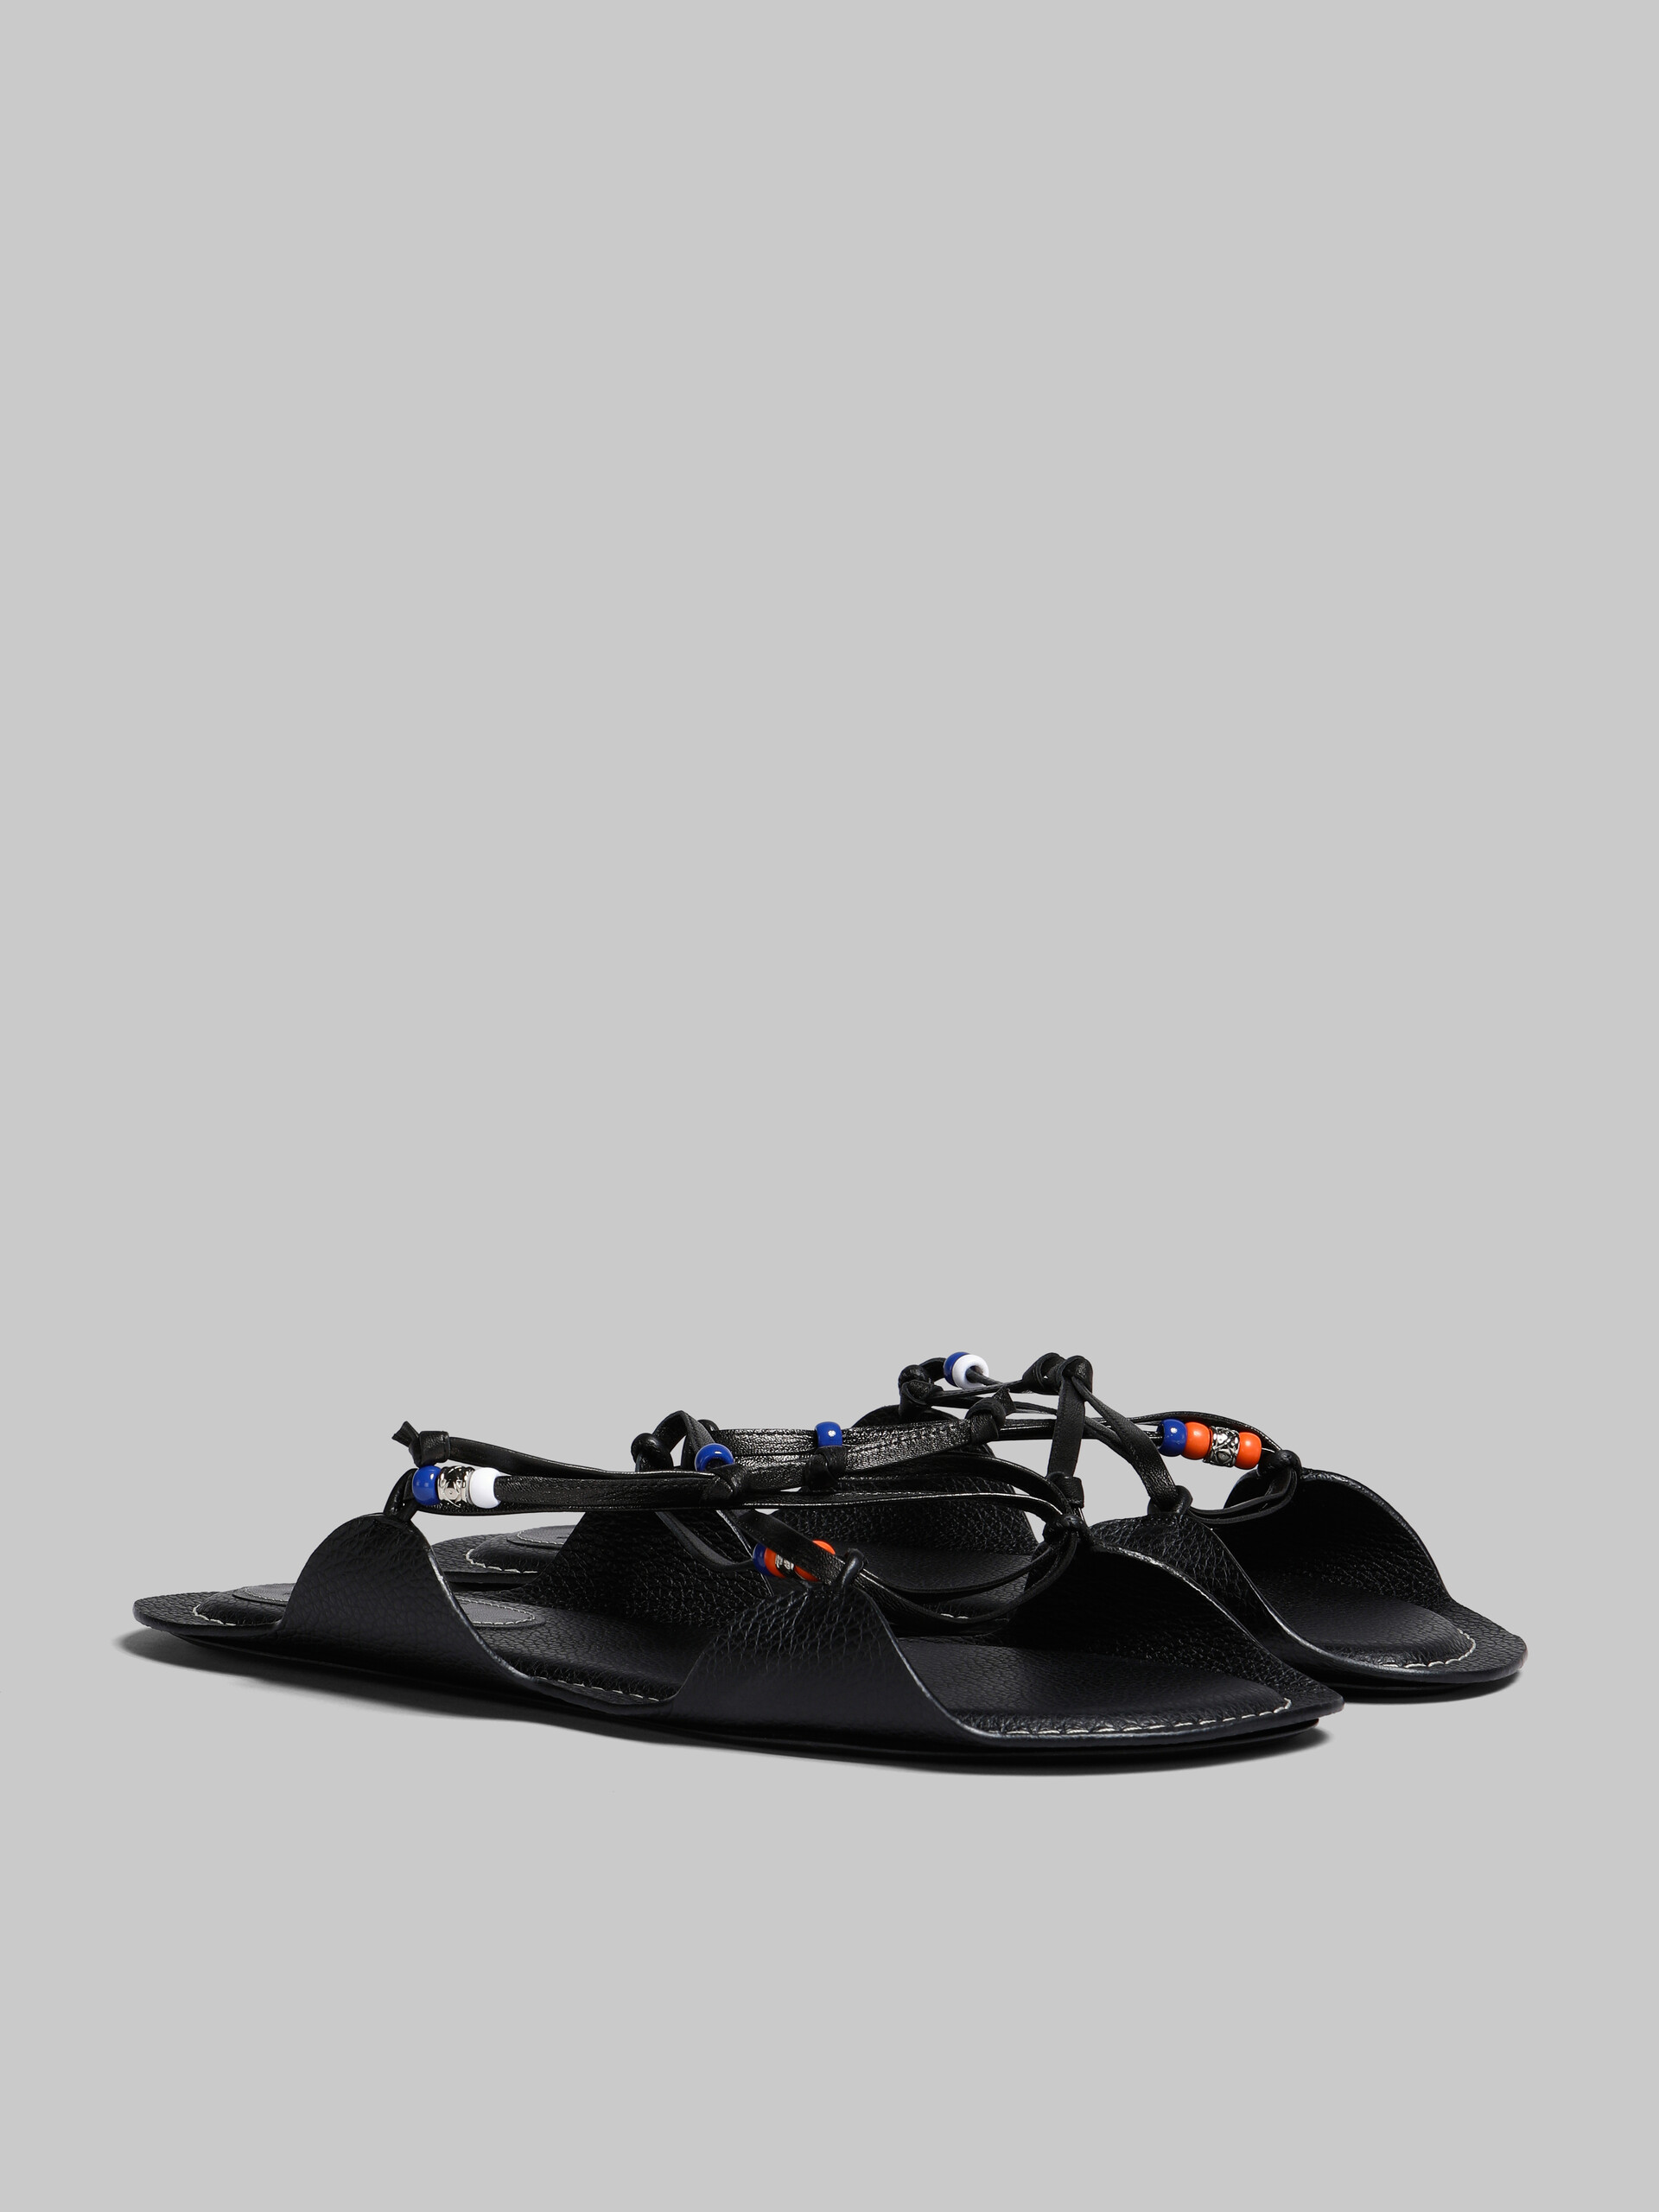 Marni x No Vacancy Inn - Black leather sandals with beads - Sandals - Image 2